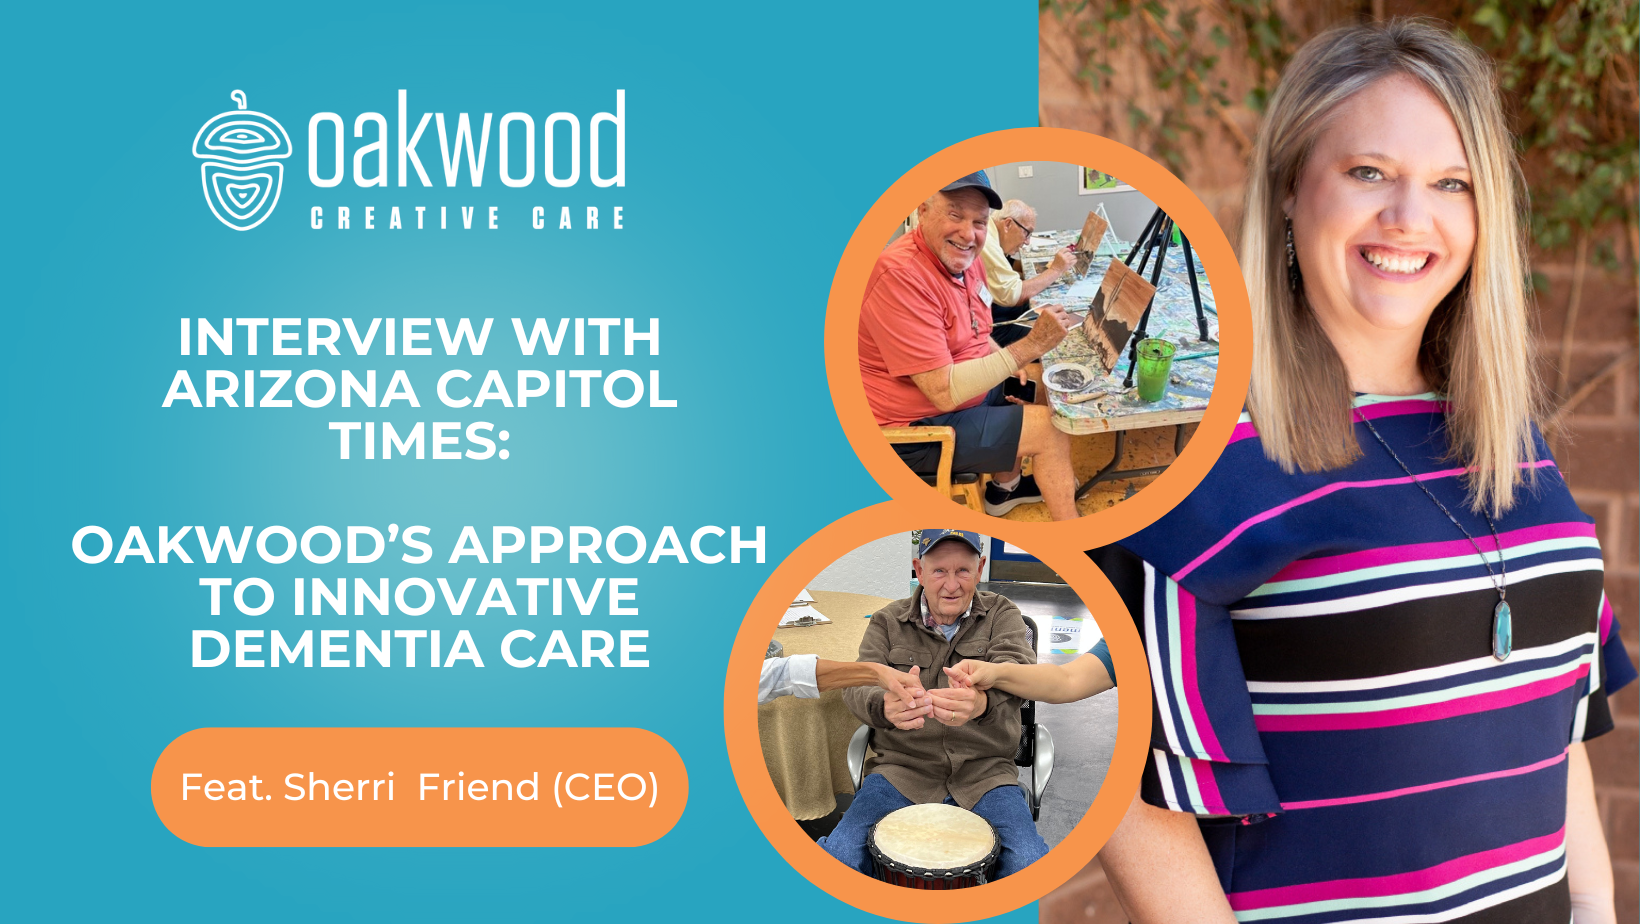 Interview with Sherri Friend, president and CEO of Oakwood Creative Care, about home of Arizona's innovative Dementia care model